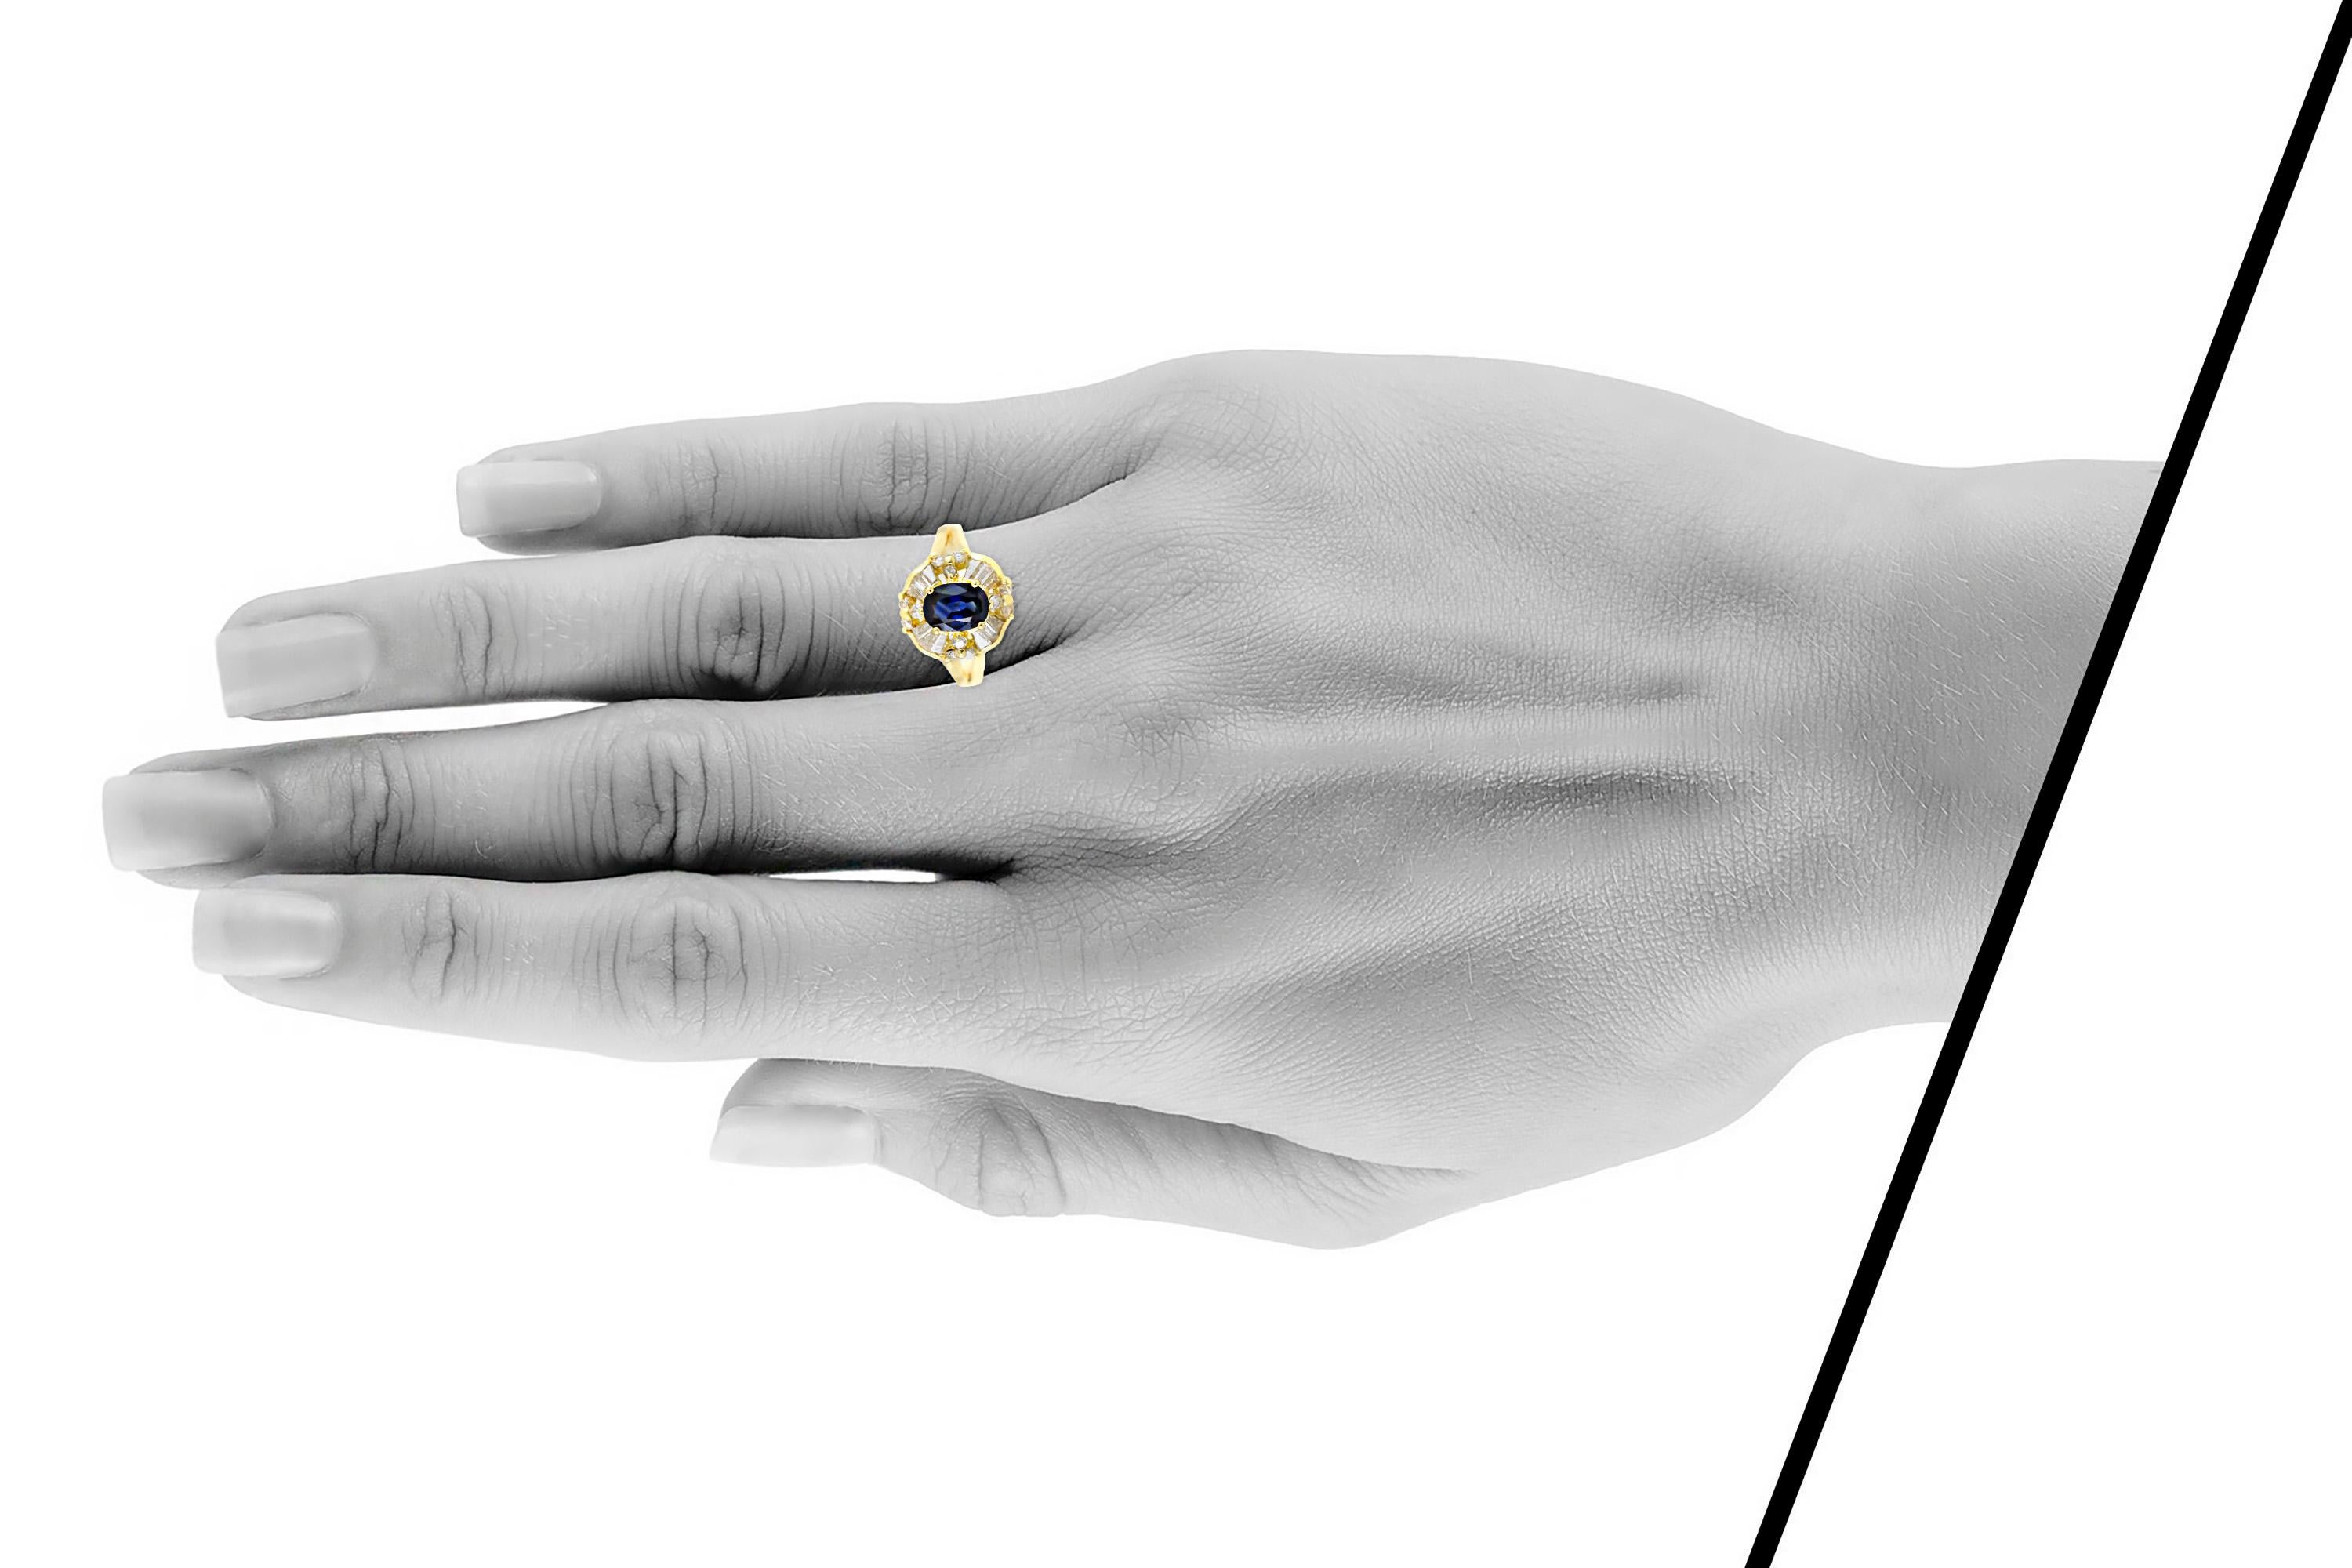 The ring is finely crafted in 14k yellow gold with diamonds weighing approximately 0.85 carat and sapphire weighing approximately total of 1.12 carat.
Circa 1980.
